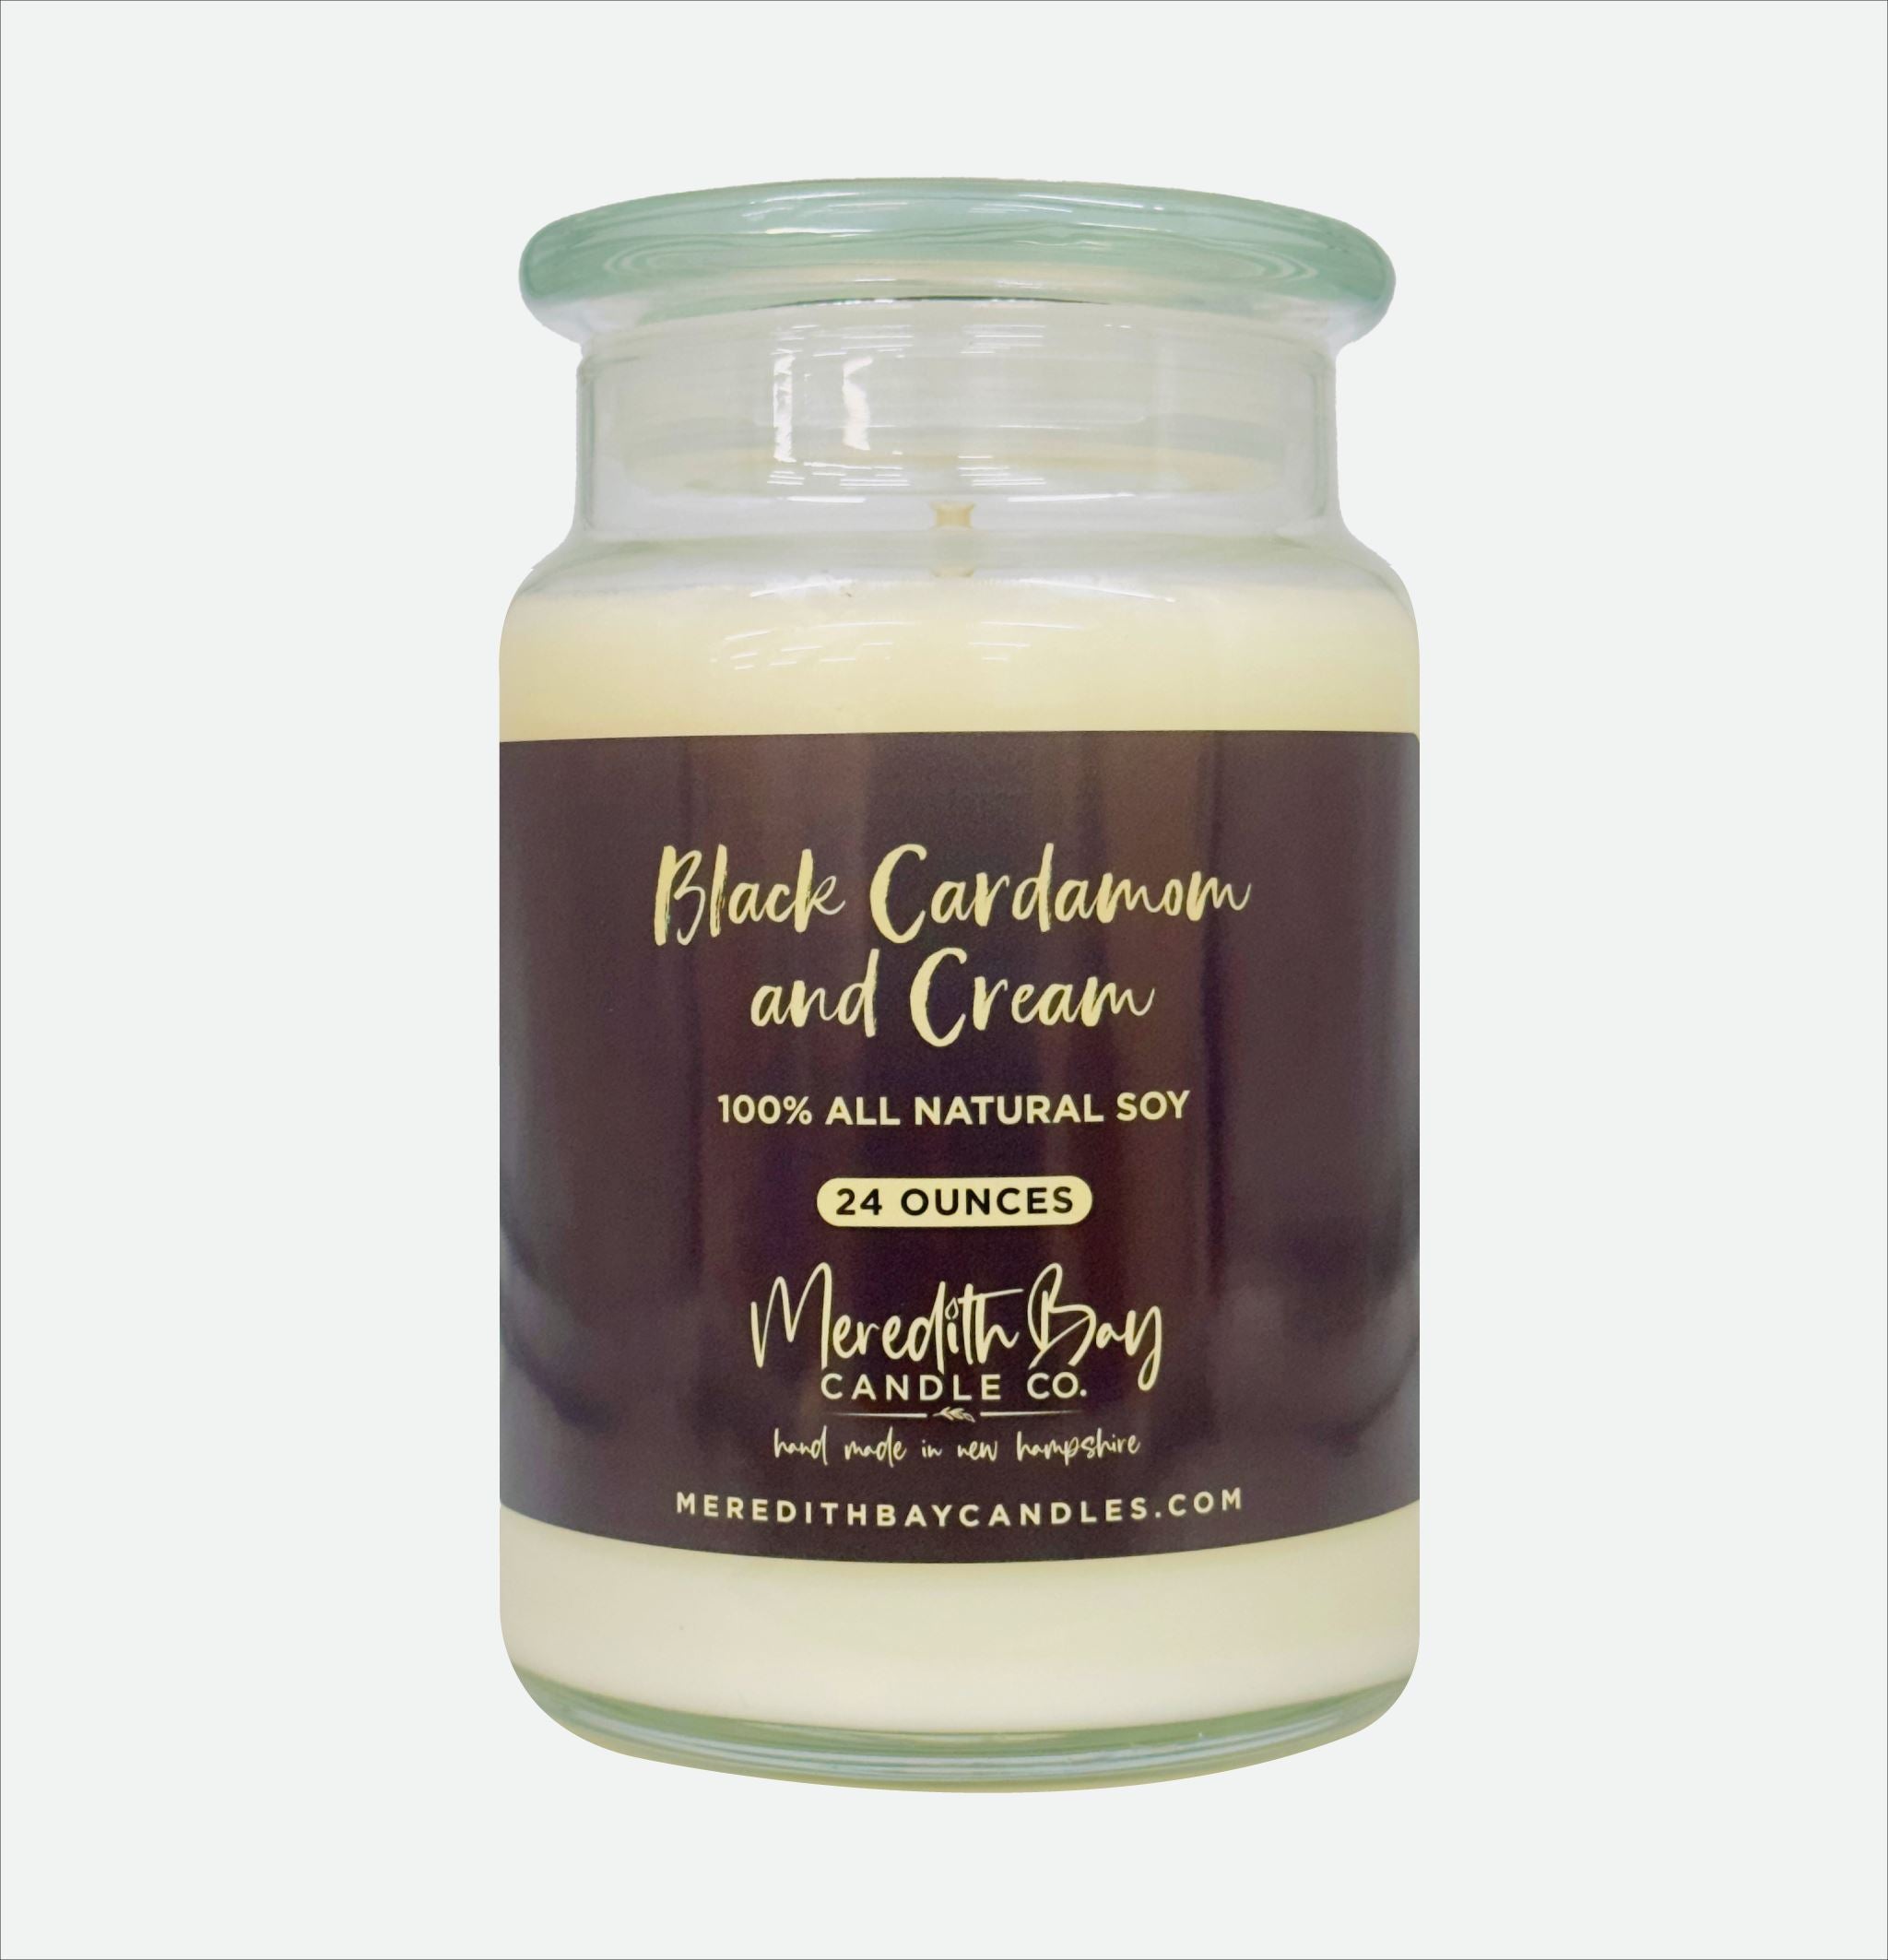 Black Cardamom & Cream Soy Candle Soy Candle Meredith Bay Candle Co 24.0 Oz 